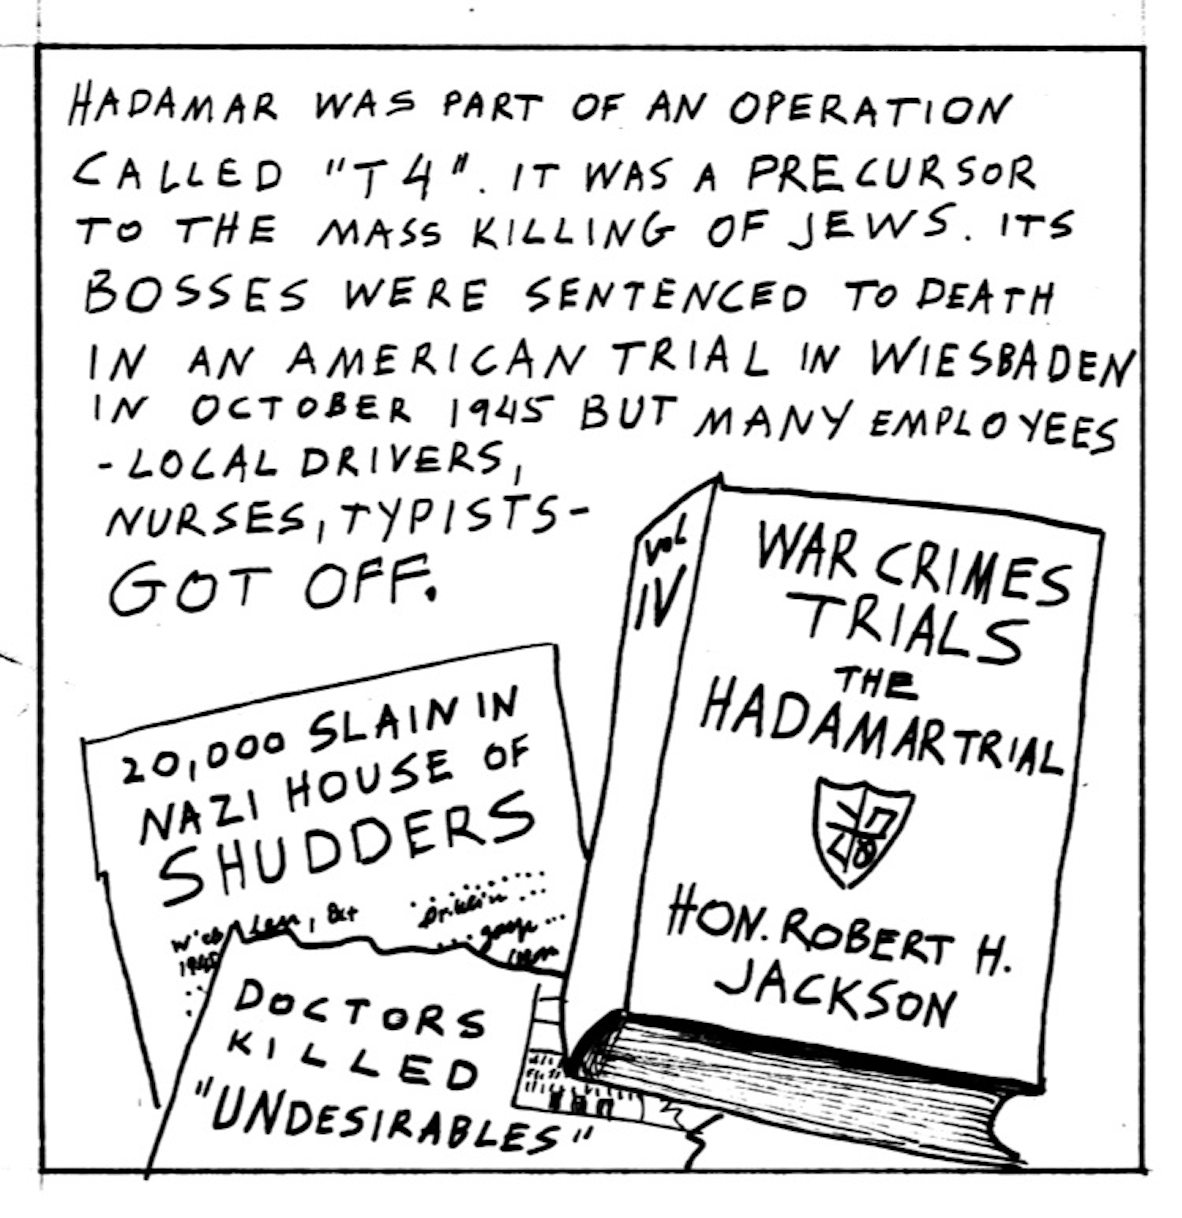 â€œHadamar was part of an operation called â€™T4.â€™ It was a precursor to the mass killing of Jews. Its bosses were sentenced to death in an American trial in Wiesbaden in October 1945 but many employees - local drivers, nurses, typists - got off.â€ Newspaper clippings read, â€œ20,000 slain in Nazi House of Shudders,â€ and, â€œDoctors killed â€˜undesirables.â€™â€ A book titled, â€œWar Crimes Trials the Hadamar Trialâ€ by Hon. Robert H. Jackson, Vol. IV.